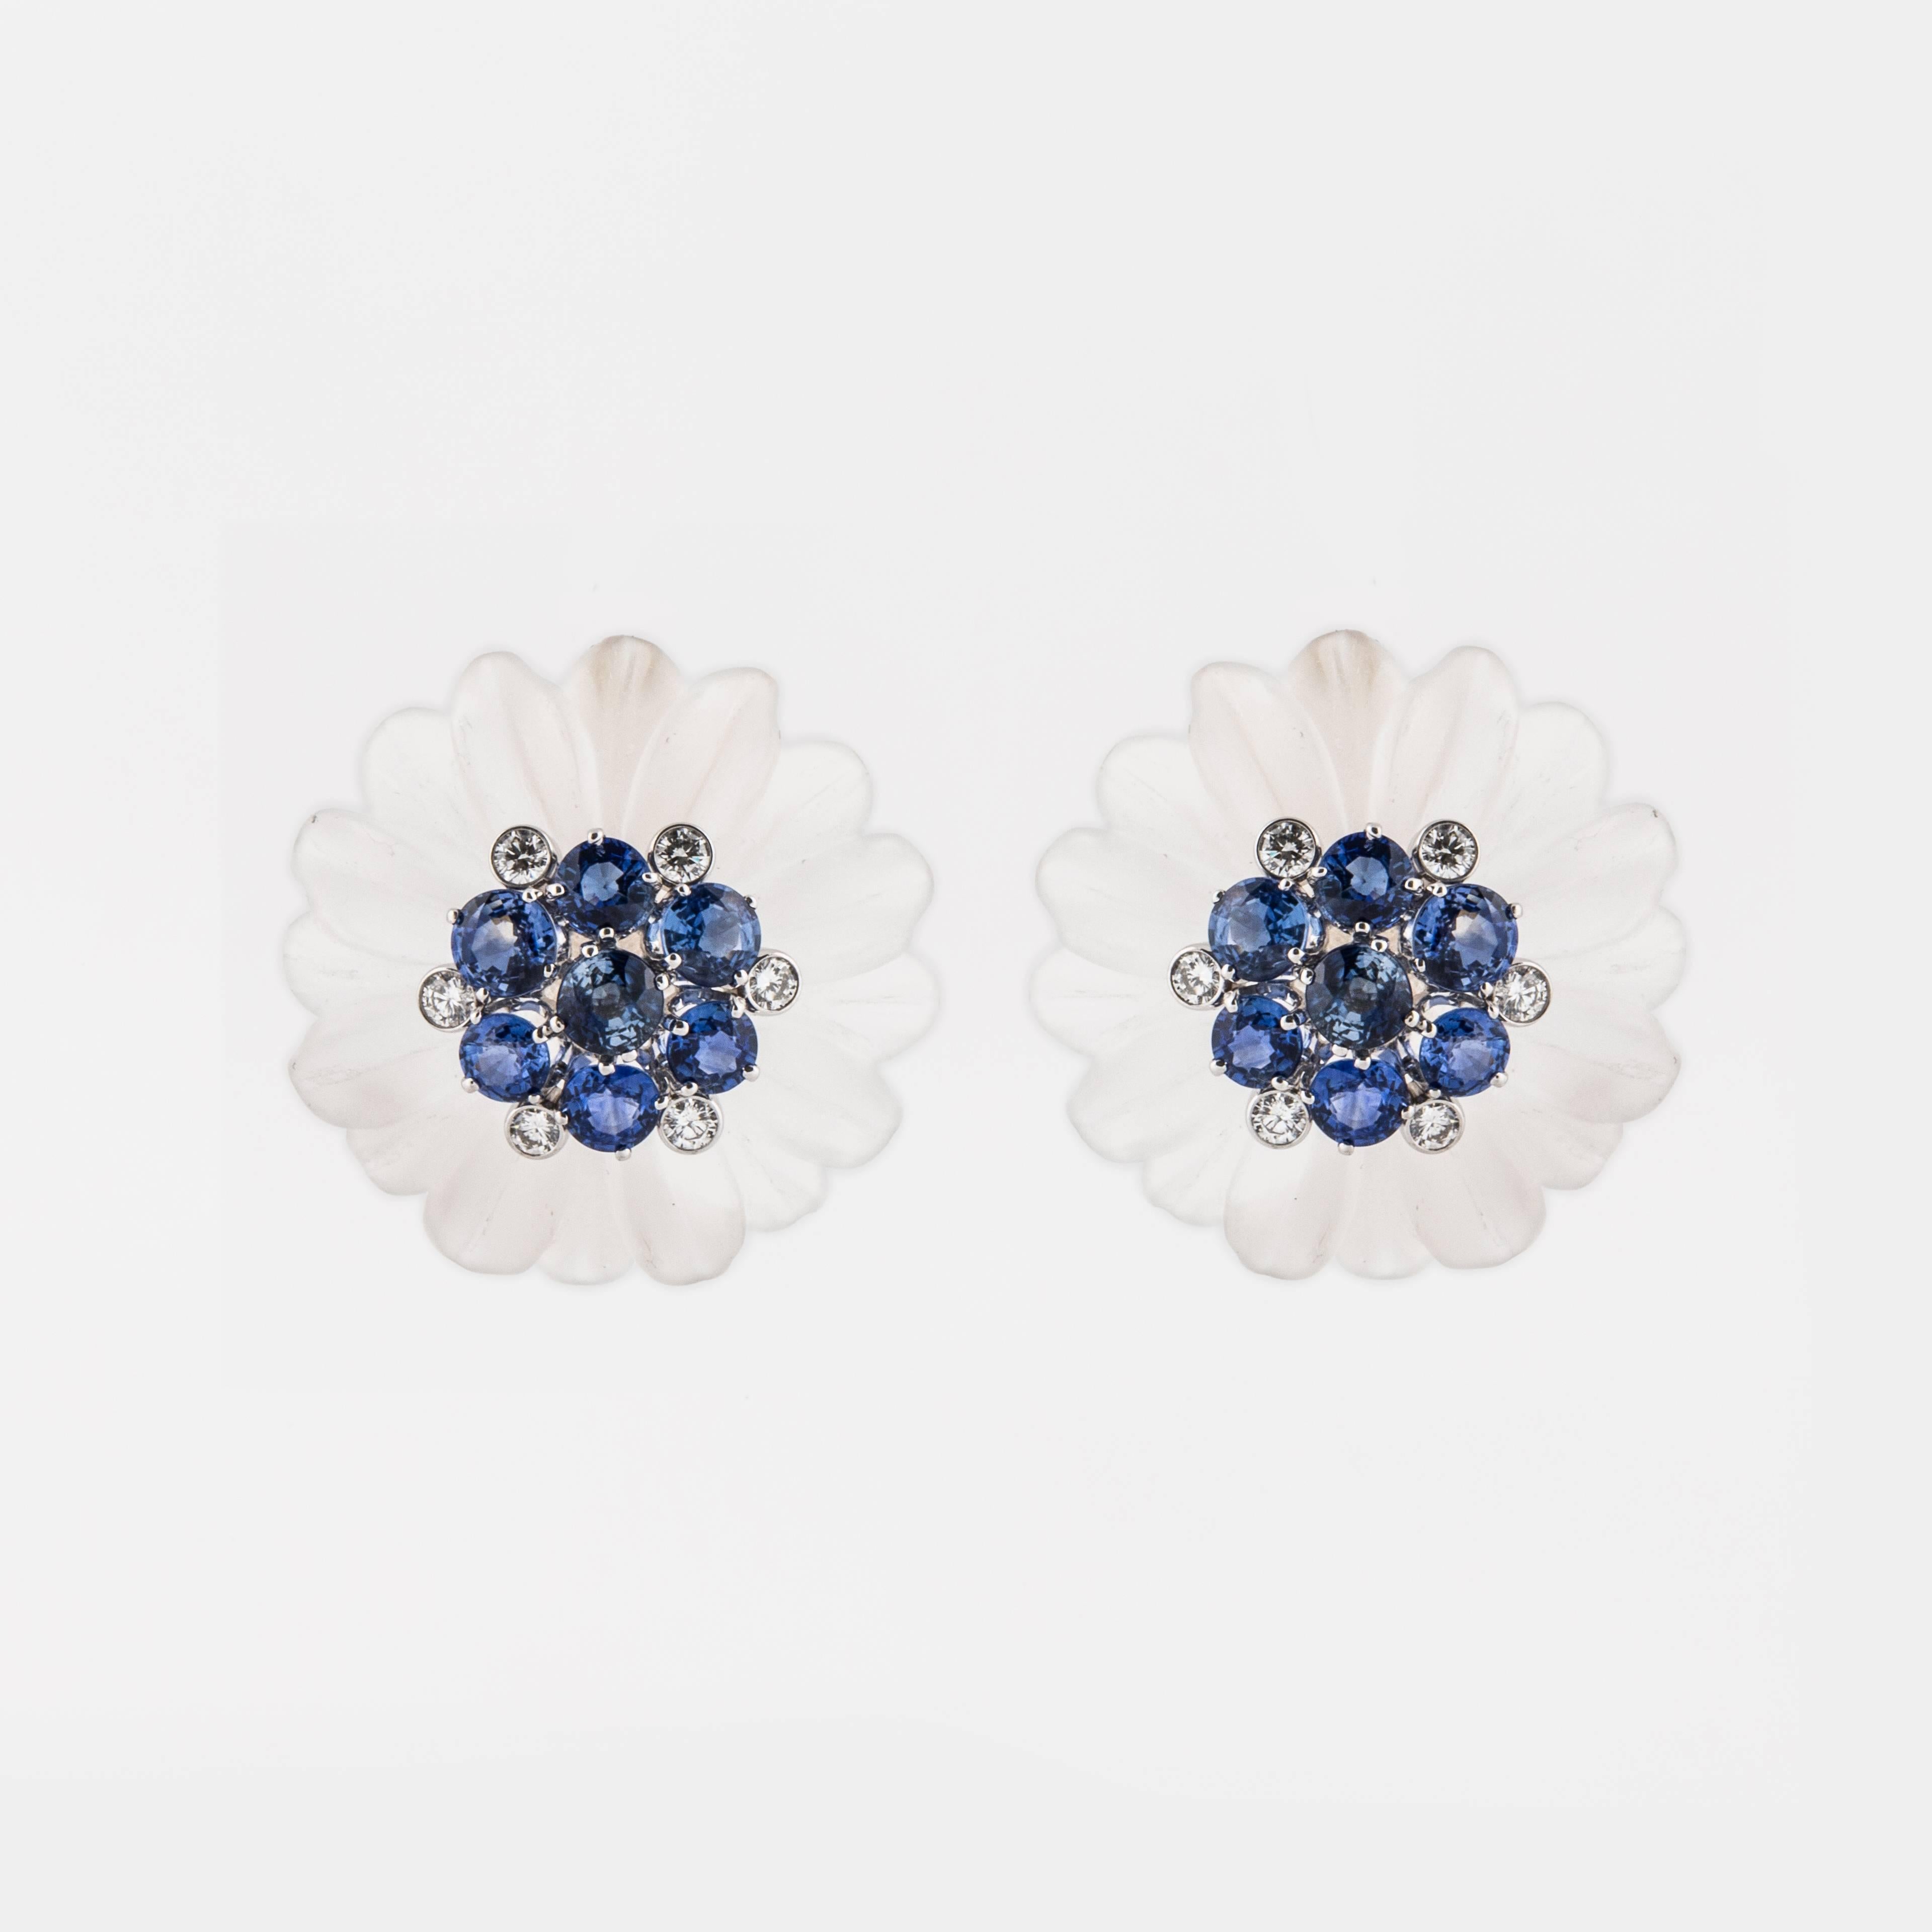 Rock crystal, sapphire and diamond earrings marked 